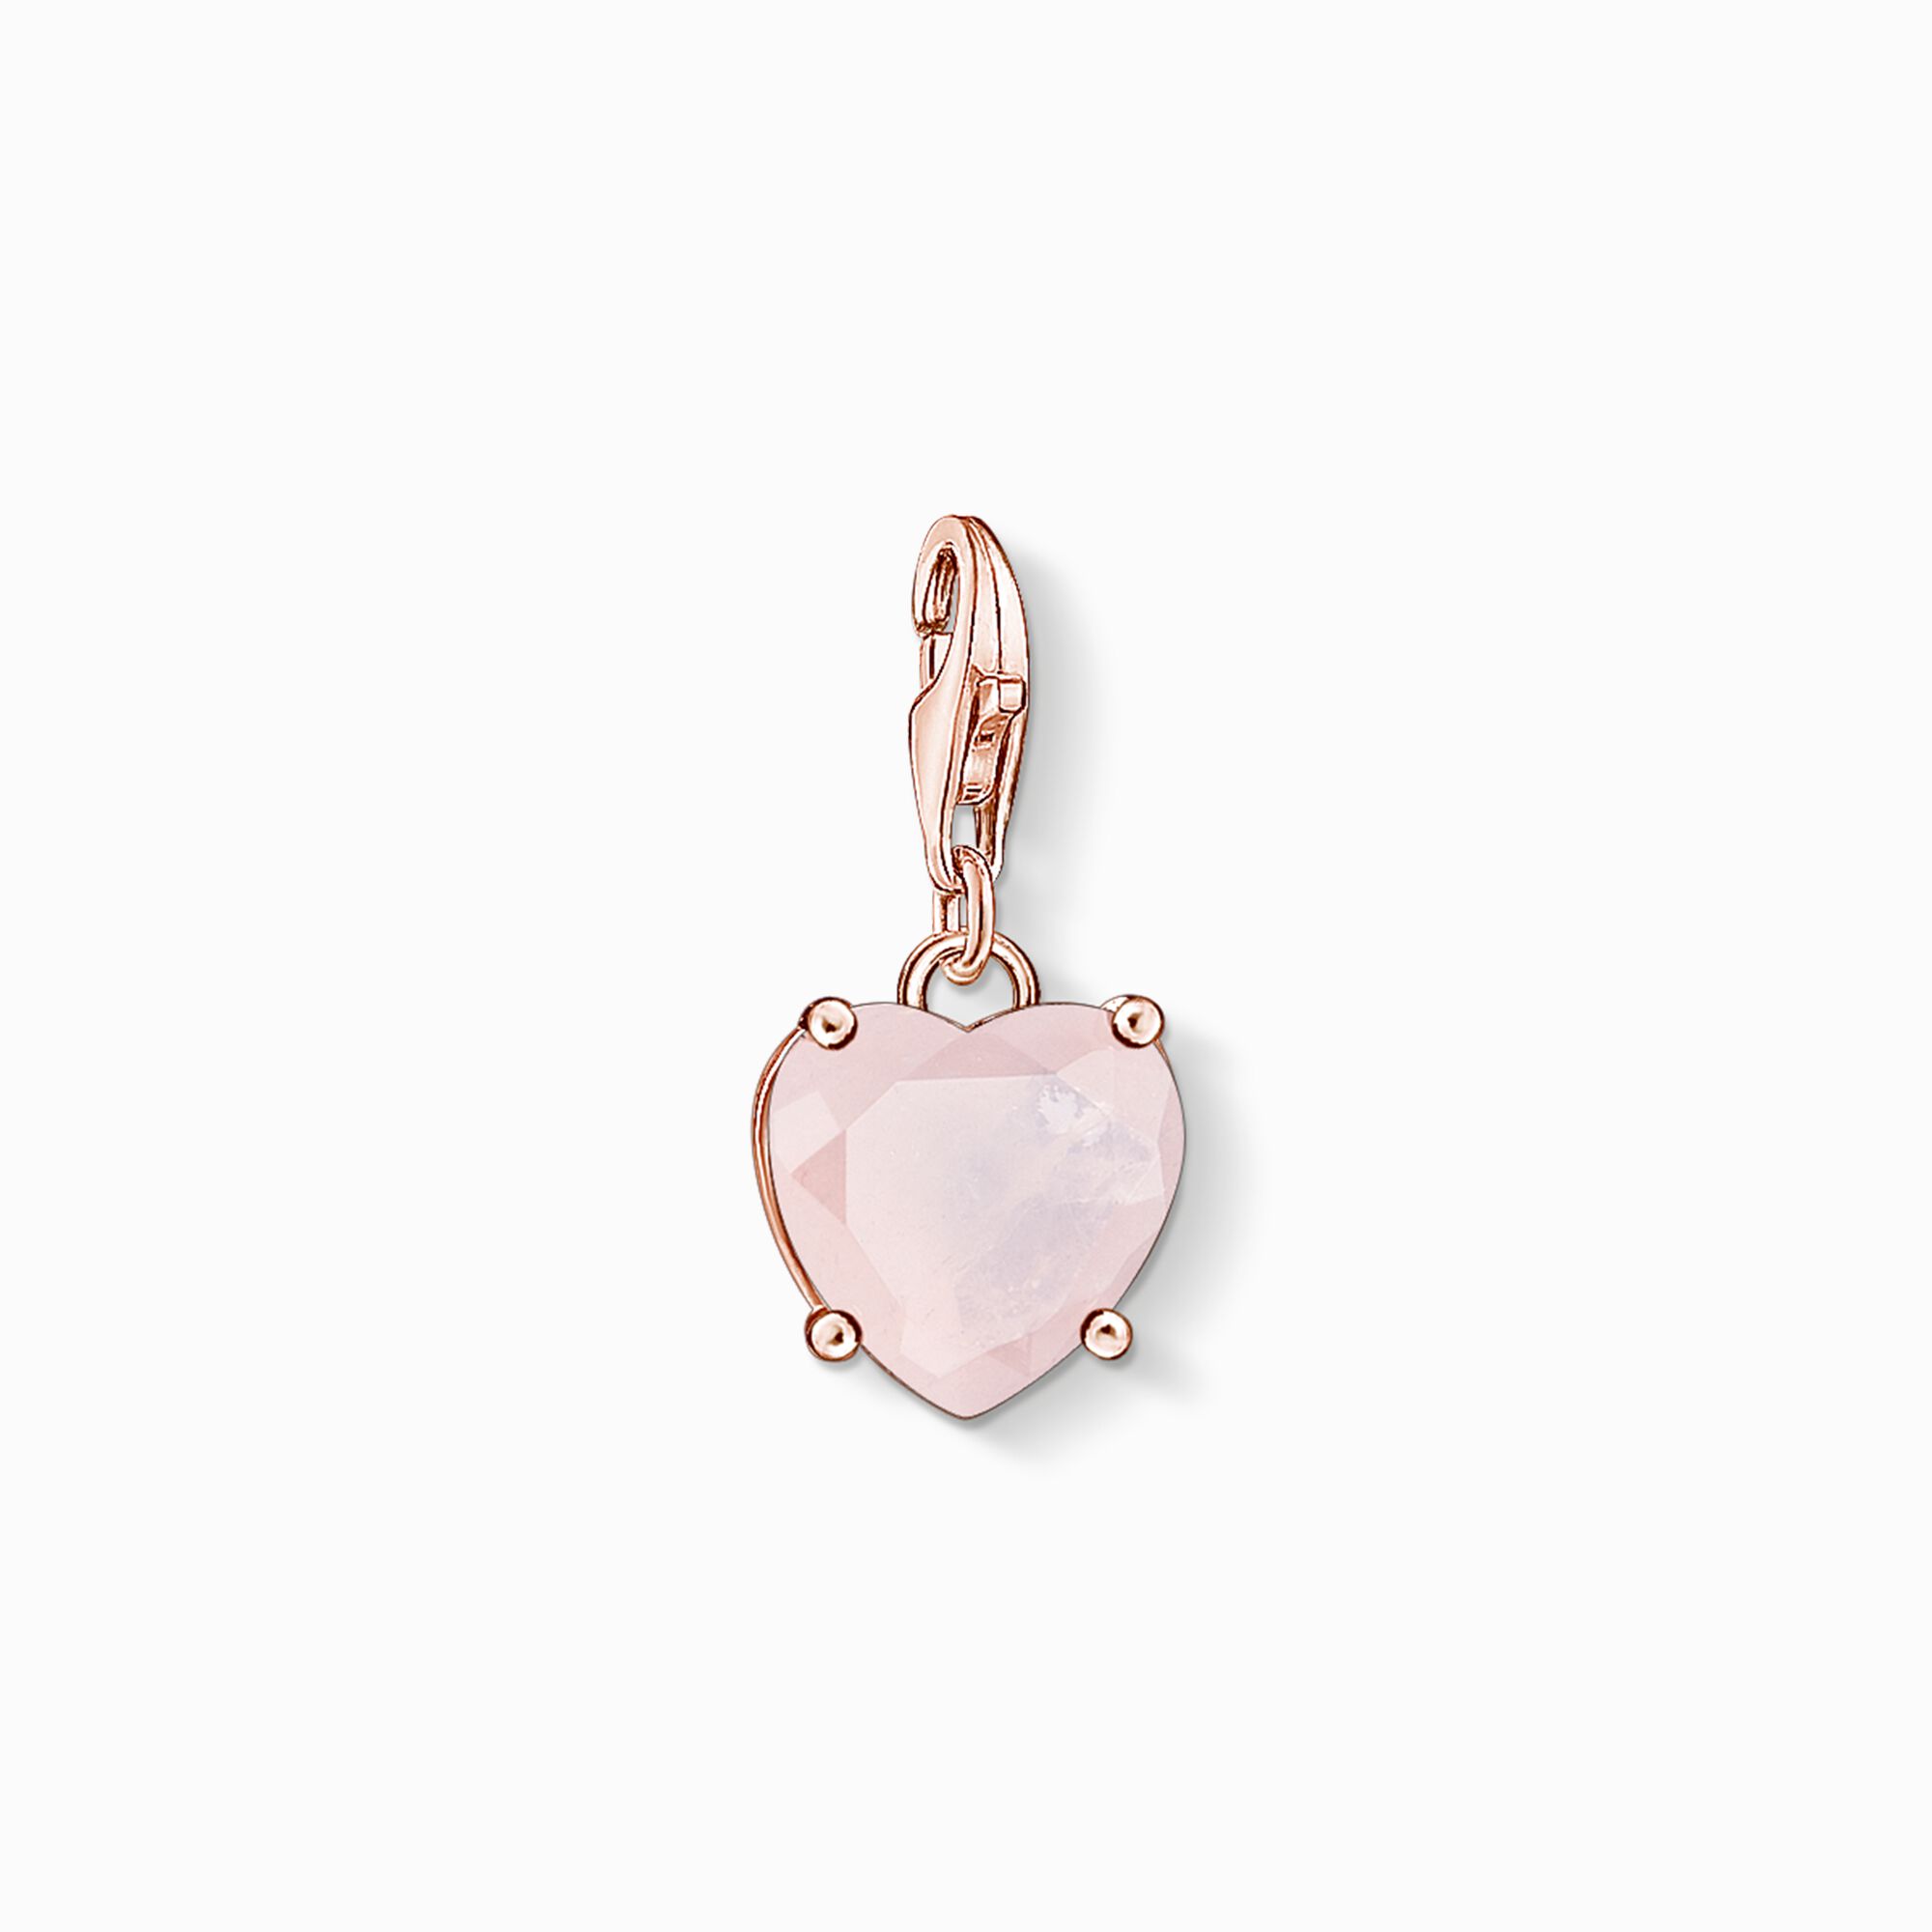 Charm pendant Heart with hot pink stone from the Charm Club collection in the THOMAS SABO online store